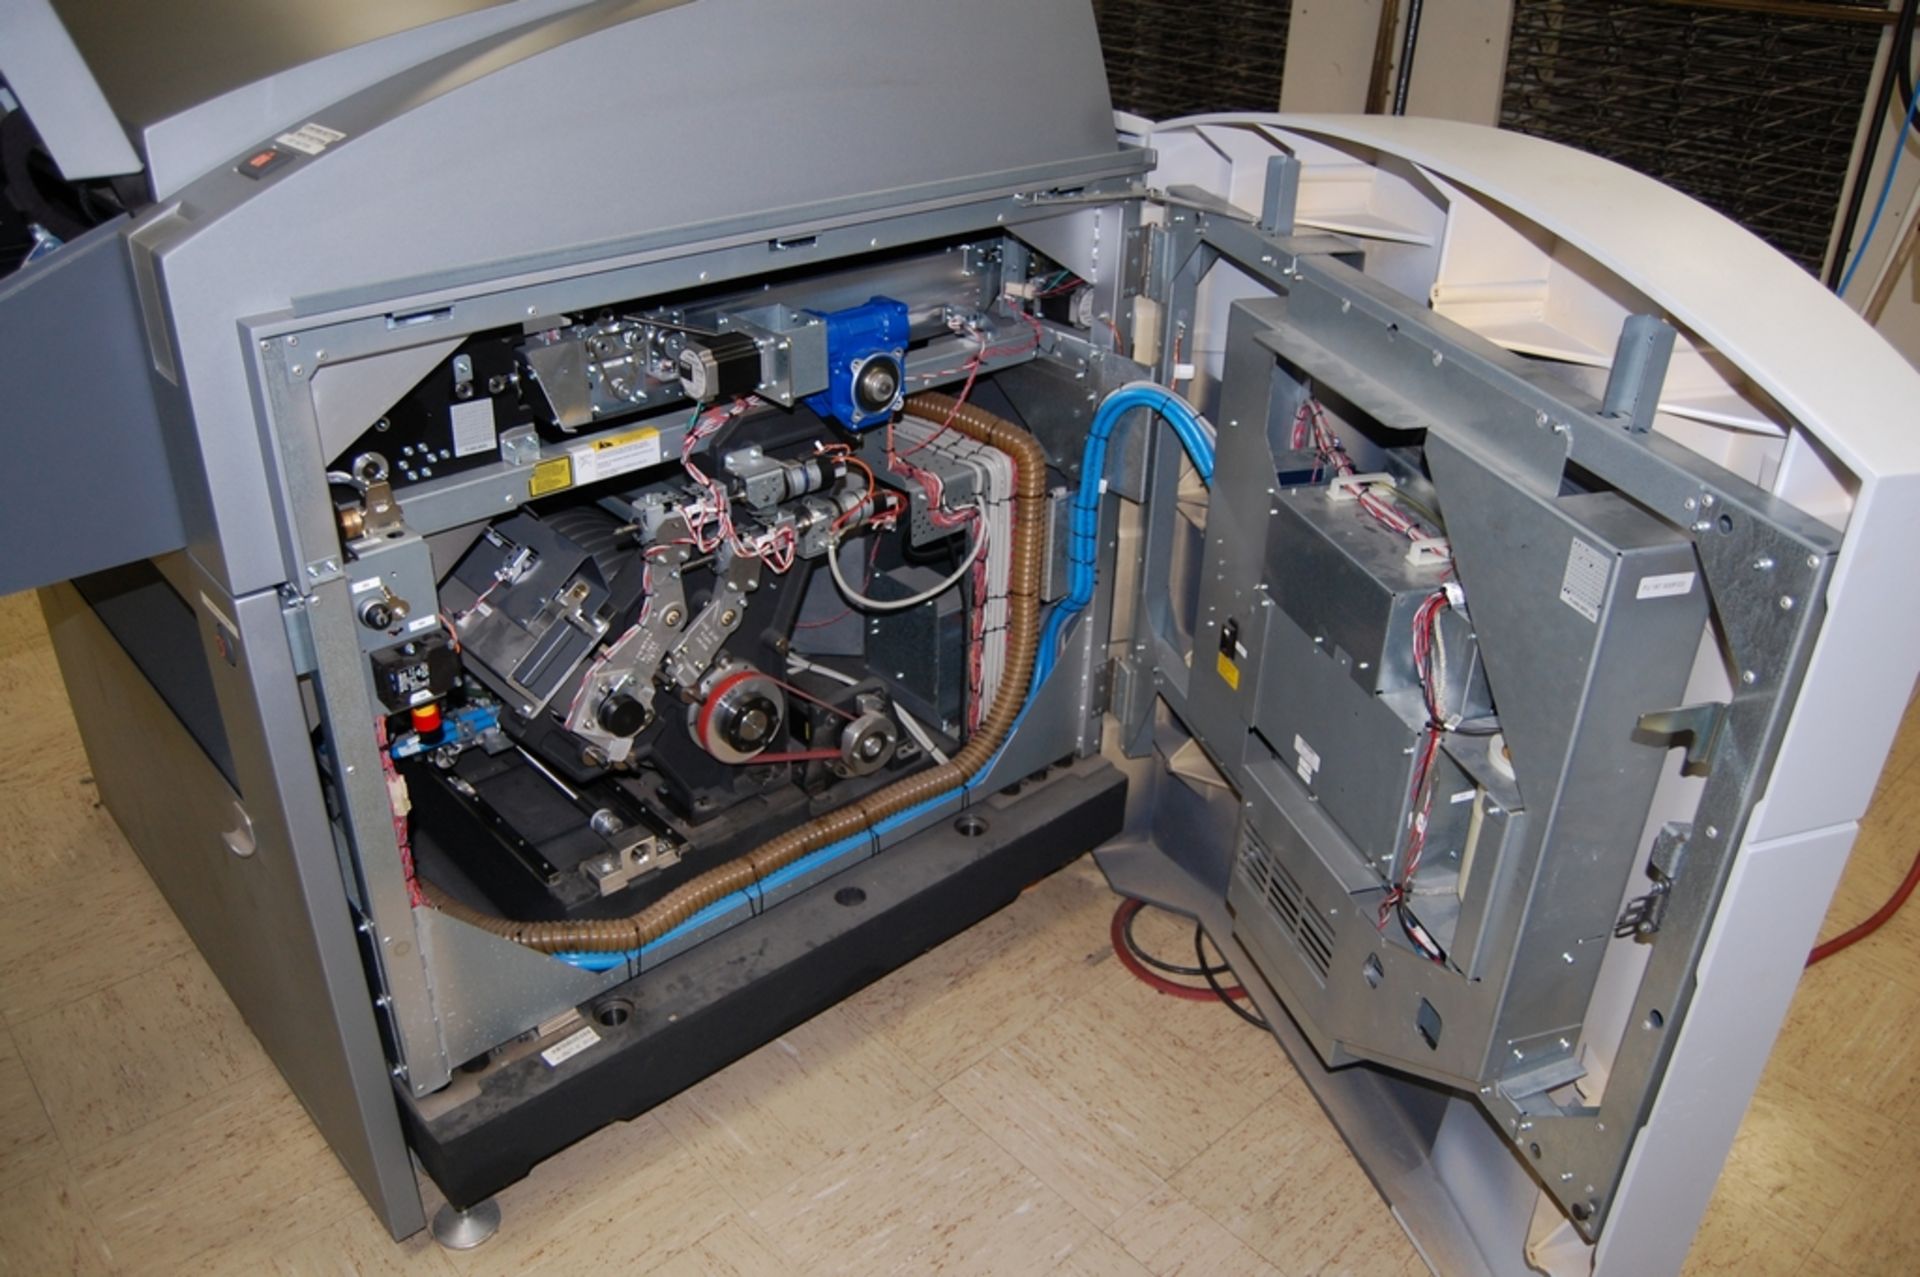 2008 Heidelberg Model Suprasetter A52/A74 Computer to Plate System - Image 12 of 20